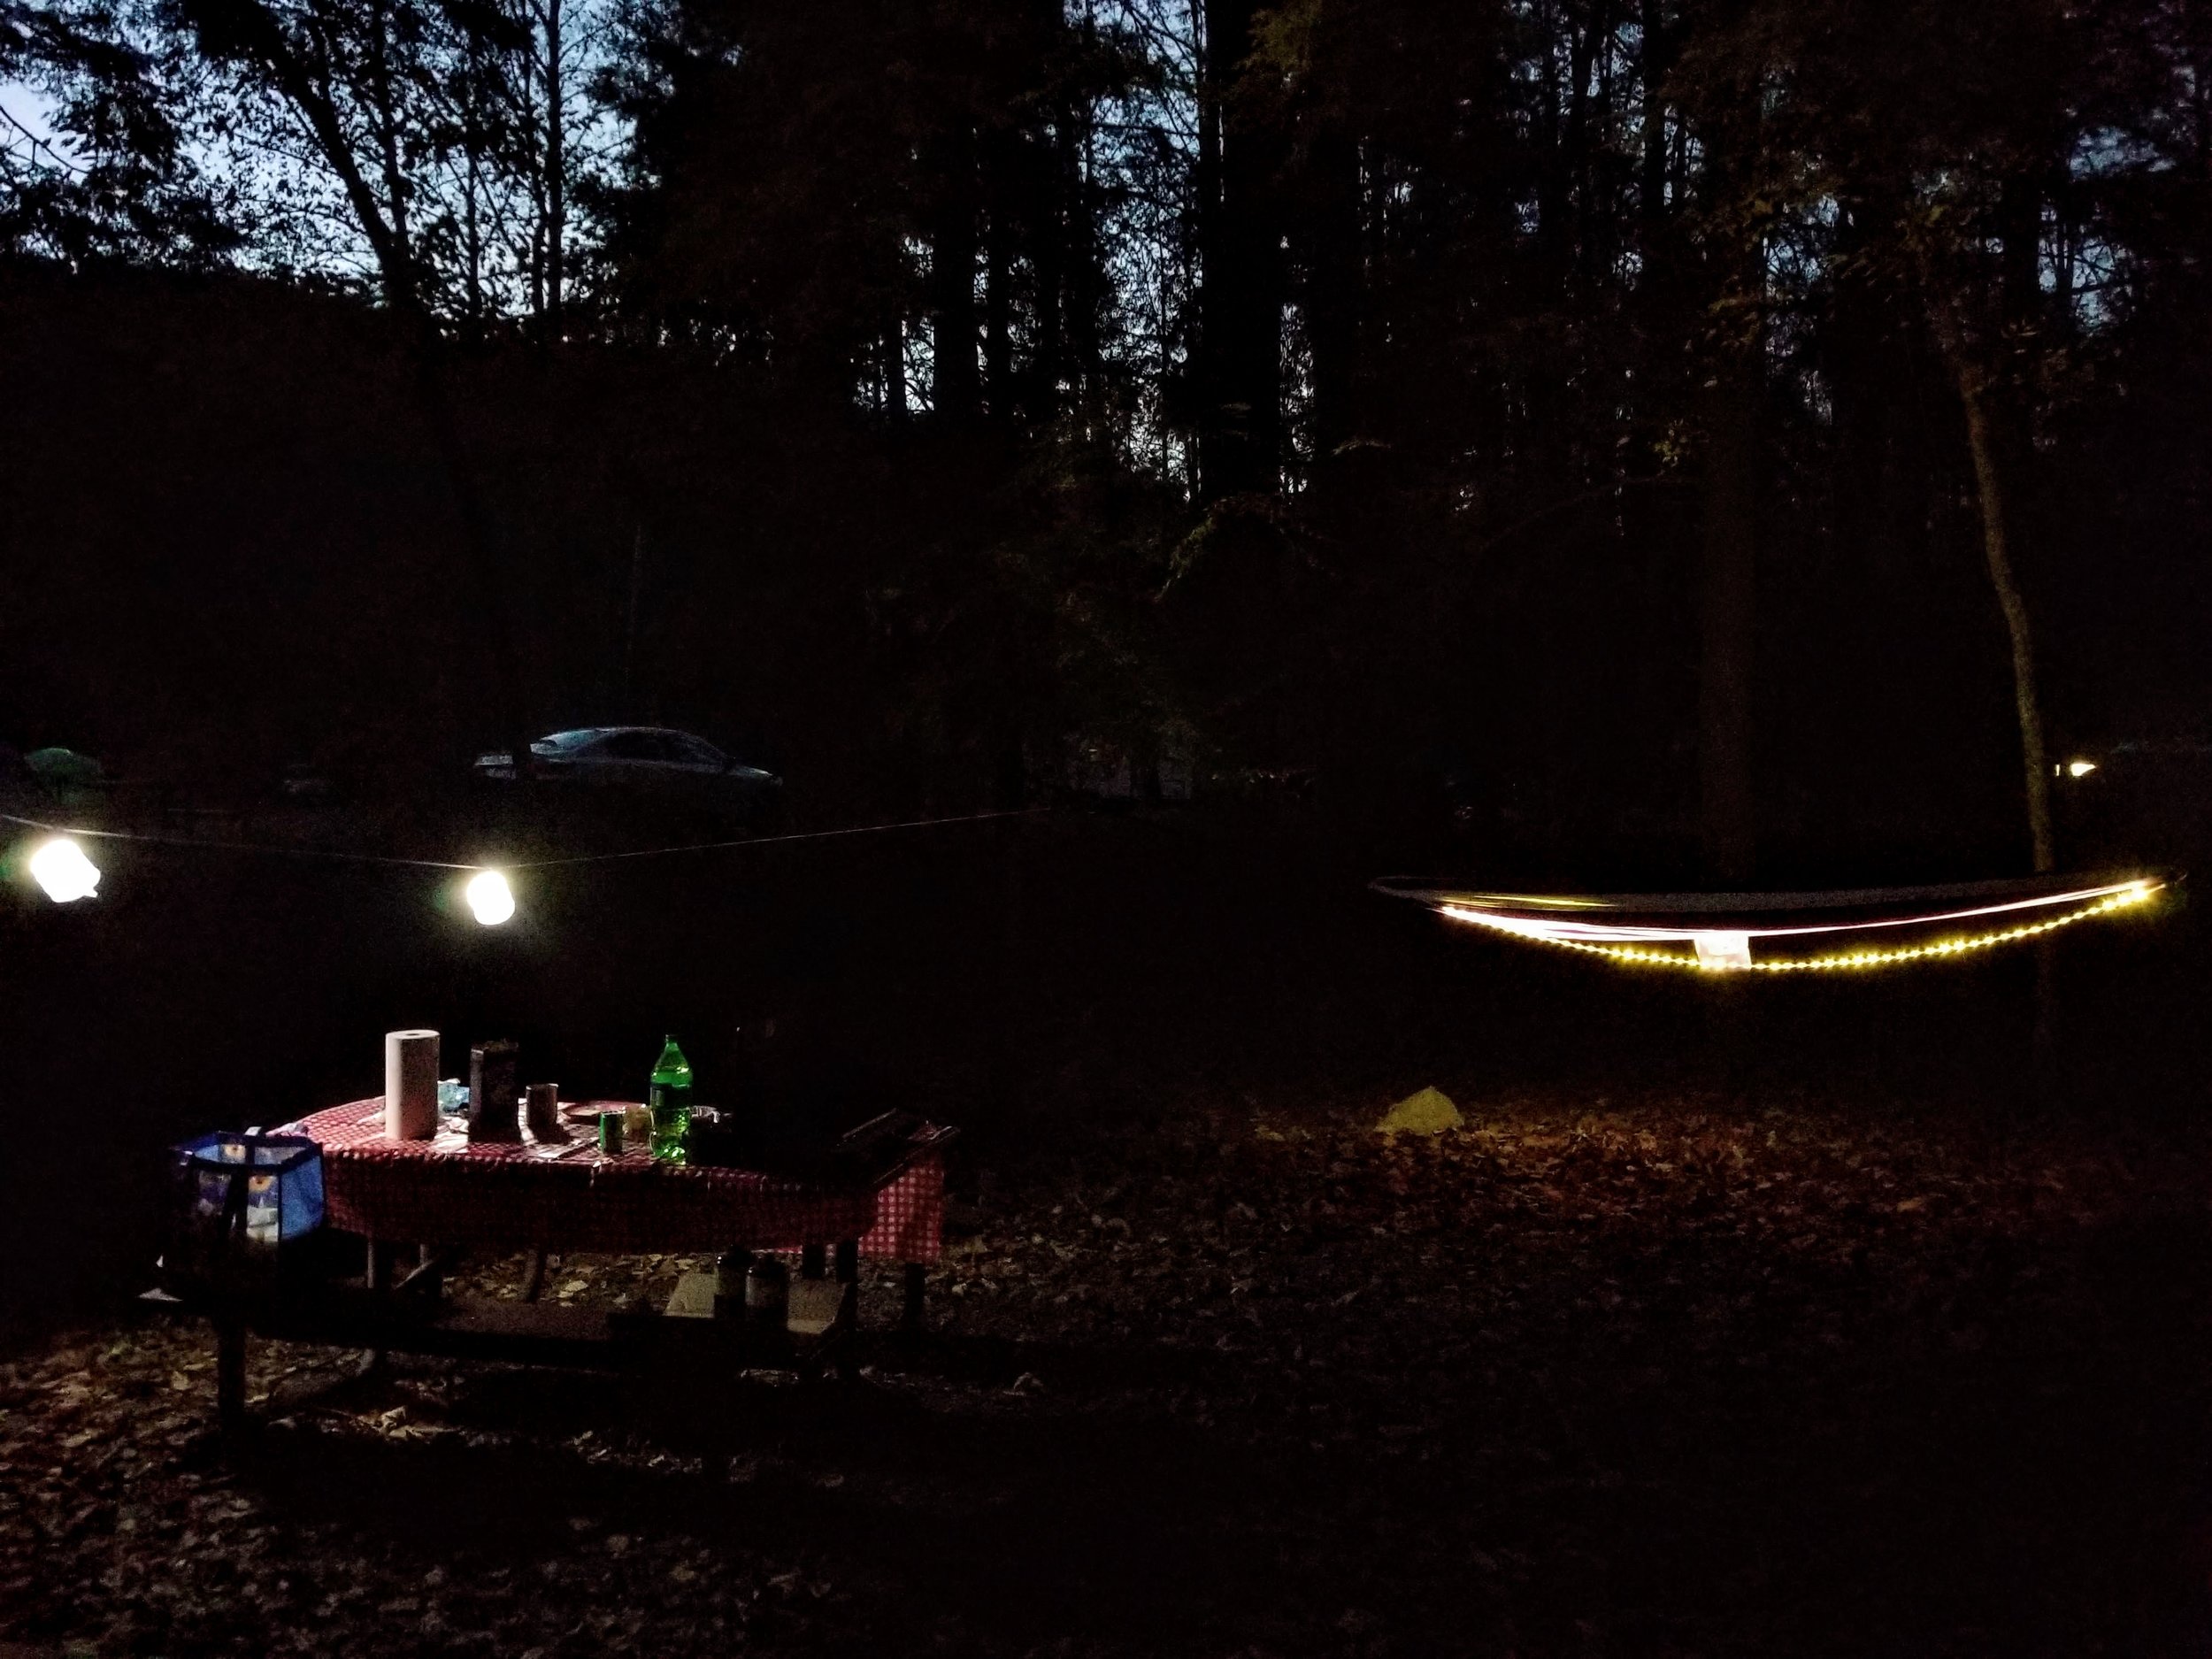 Luci lights hanging over the picnic table